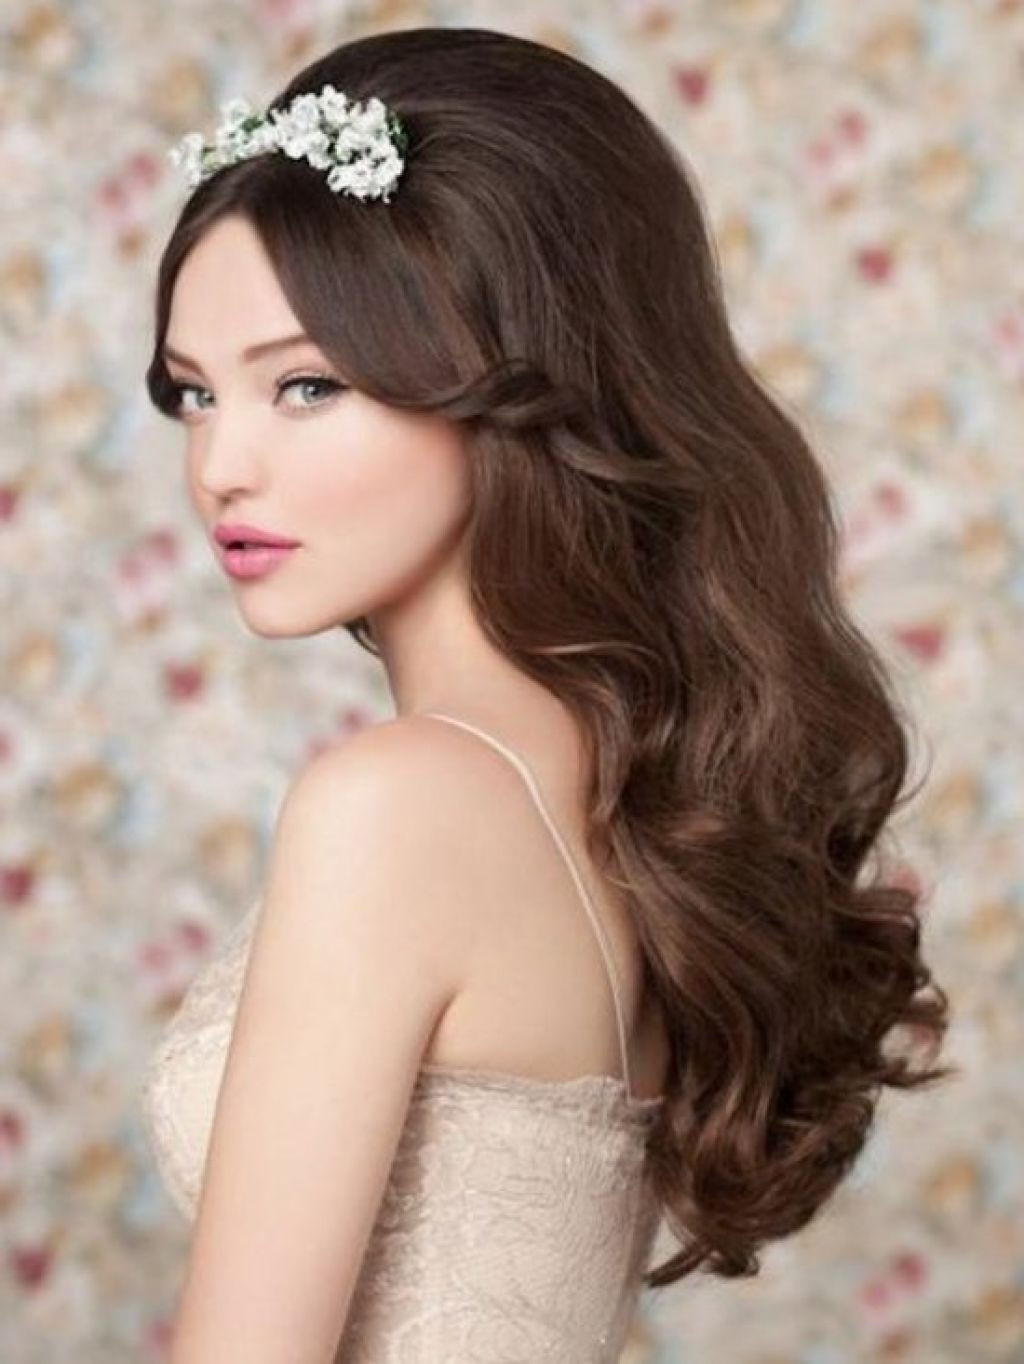 Elegant Hairstyles For Wedding
 20 Wedding Hairstyle Long Hair You Can Do At Home MagMent